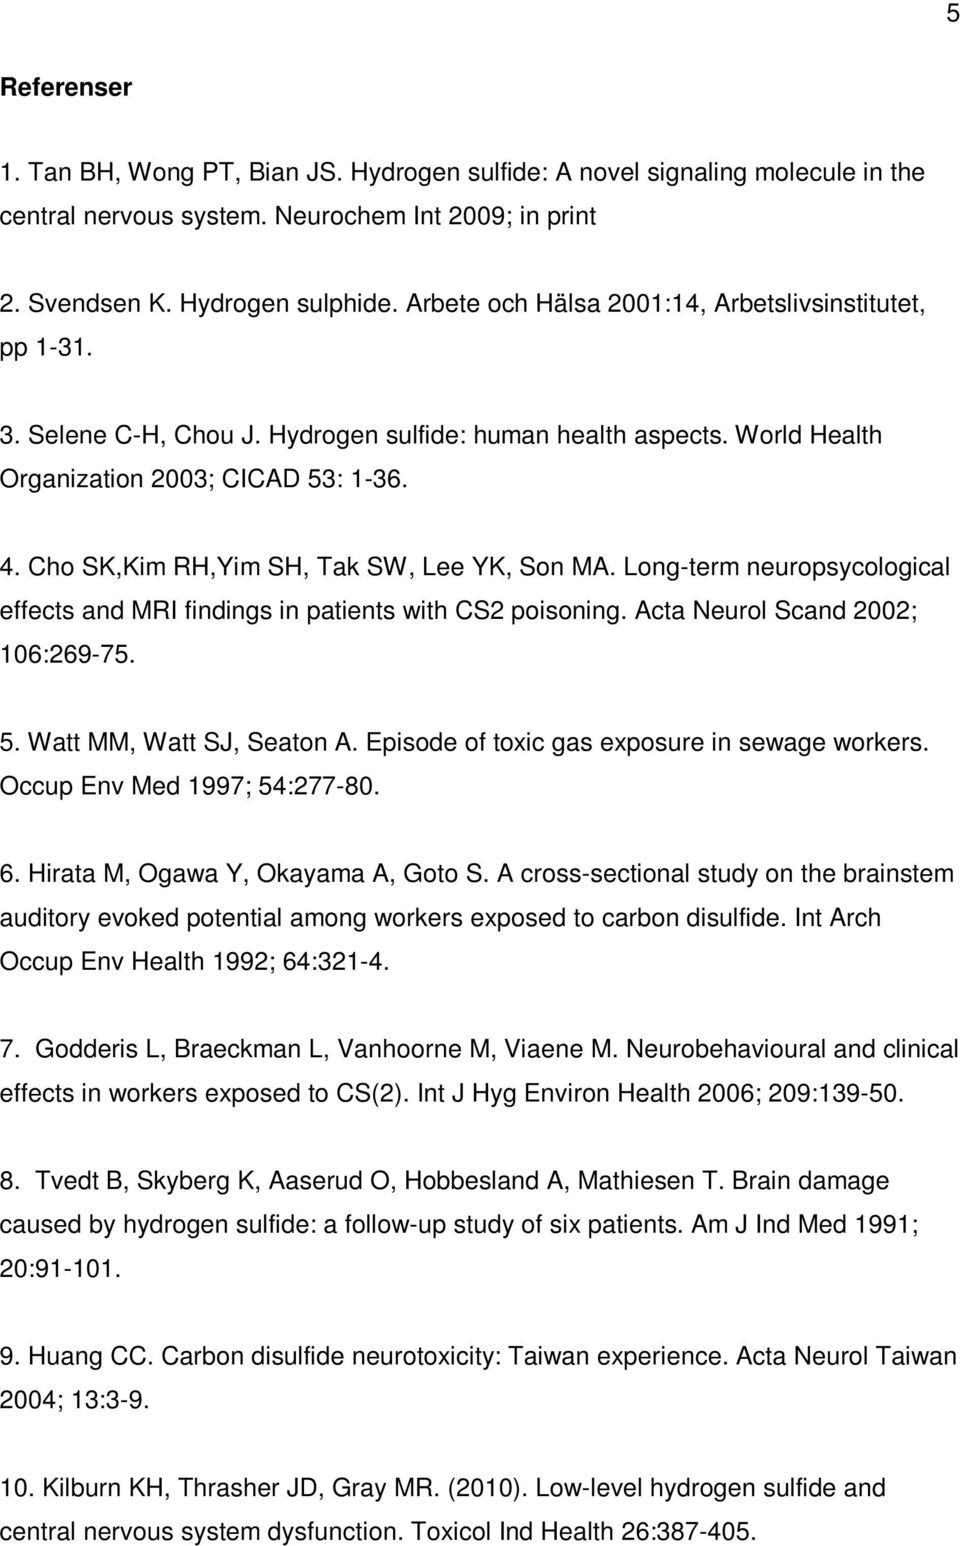 Cho SK,Kim RH,Yim SH, Tak SW, Lee YK, Son MA. Long-term neuropsycological effects and MRI findings in patients with CS2 poisoning. Acta Neurol Scand 2002; 106:269-75. 5. Watt MM, Watt SJ, Seaton A.